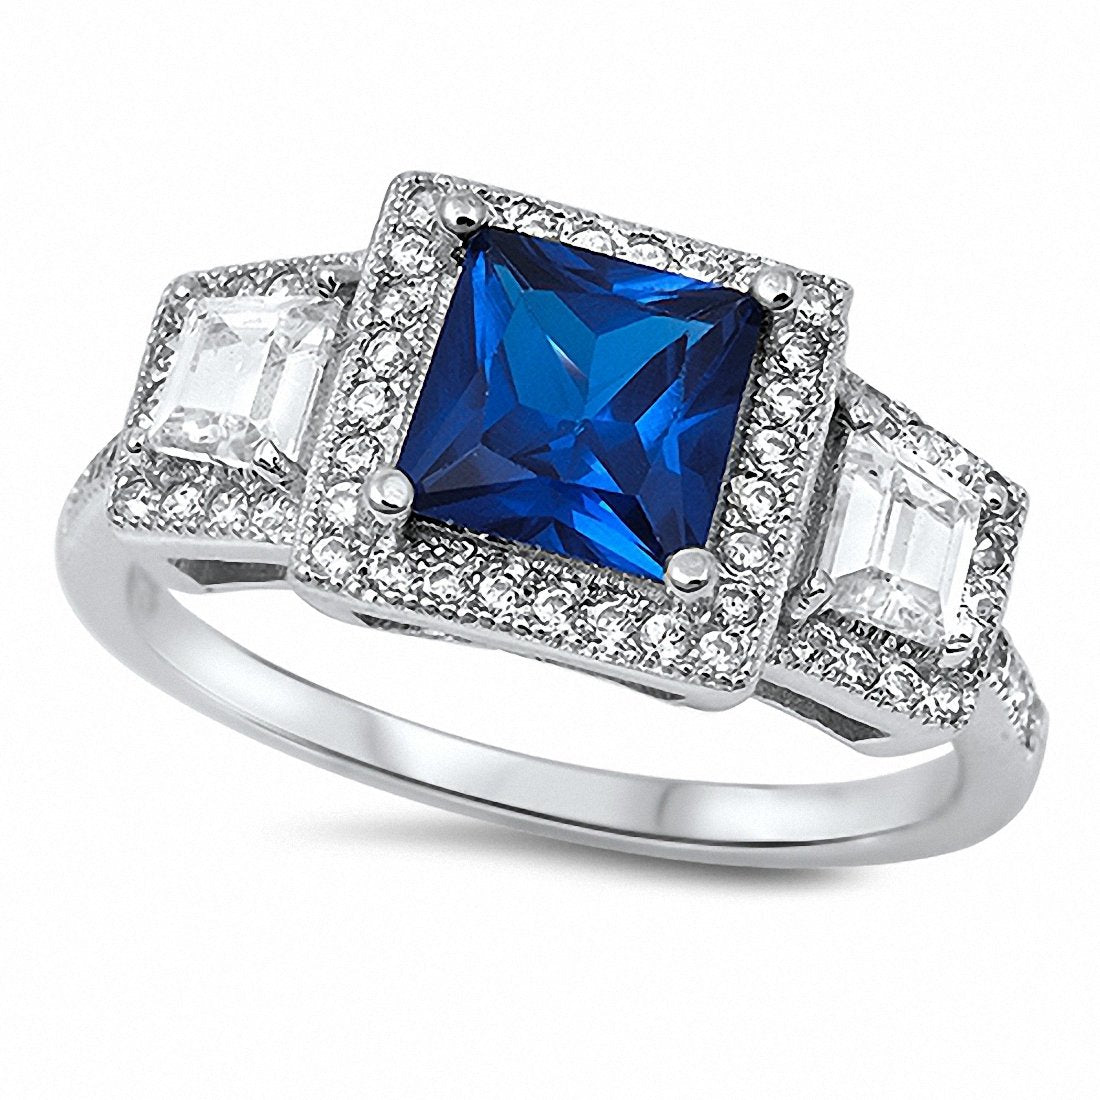 Bespoke Three Stone Ring with Square Sapphire & Princess Cut Diamonds – The  London Victorian Ring Co